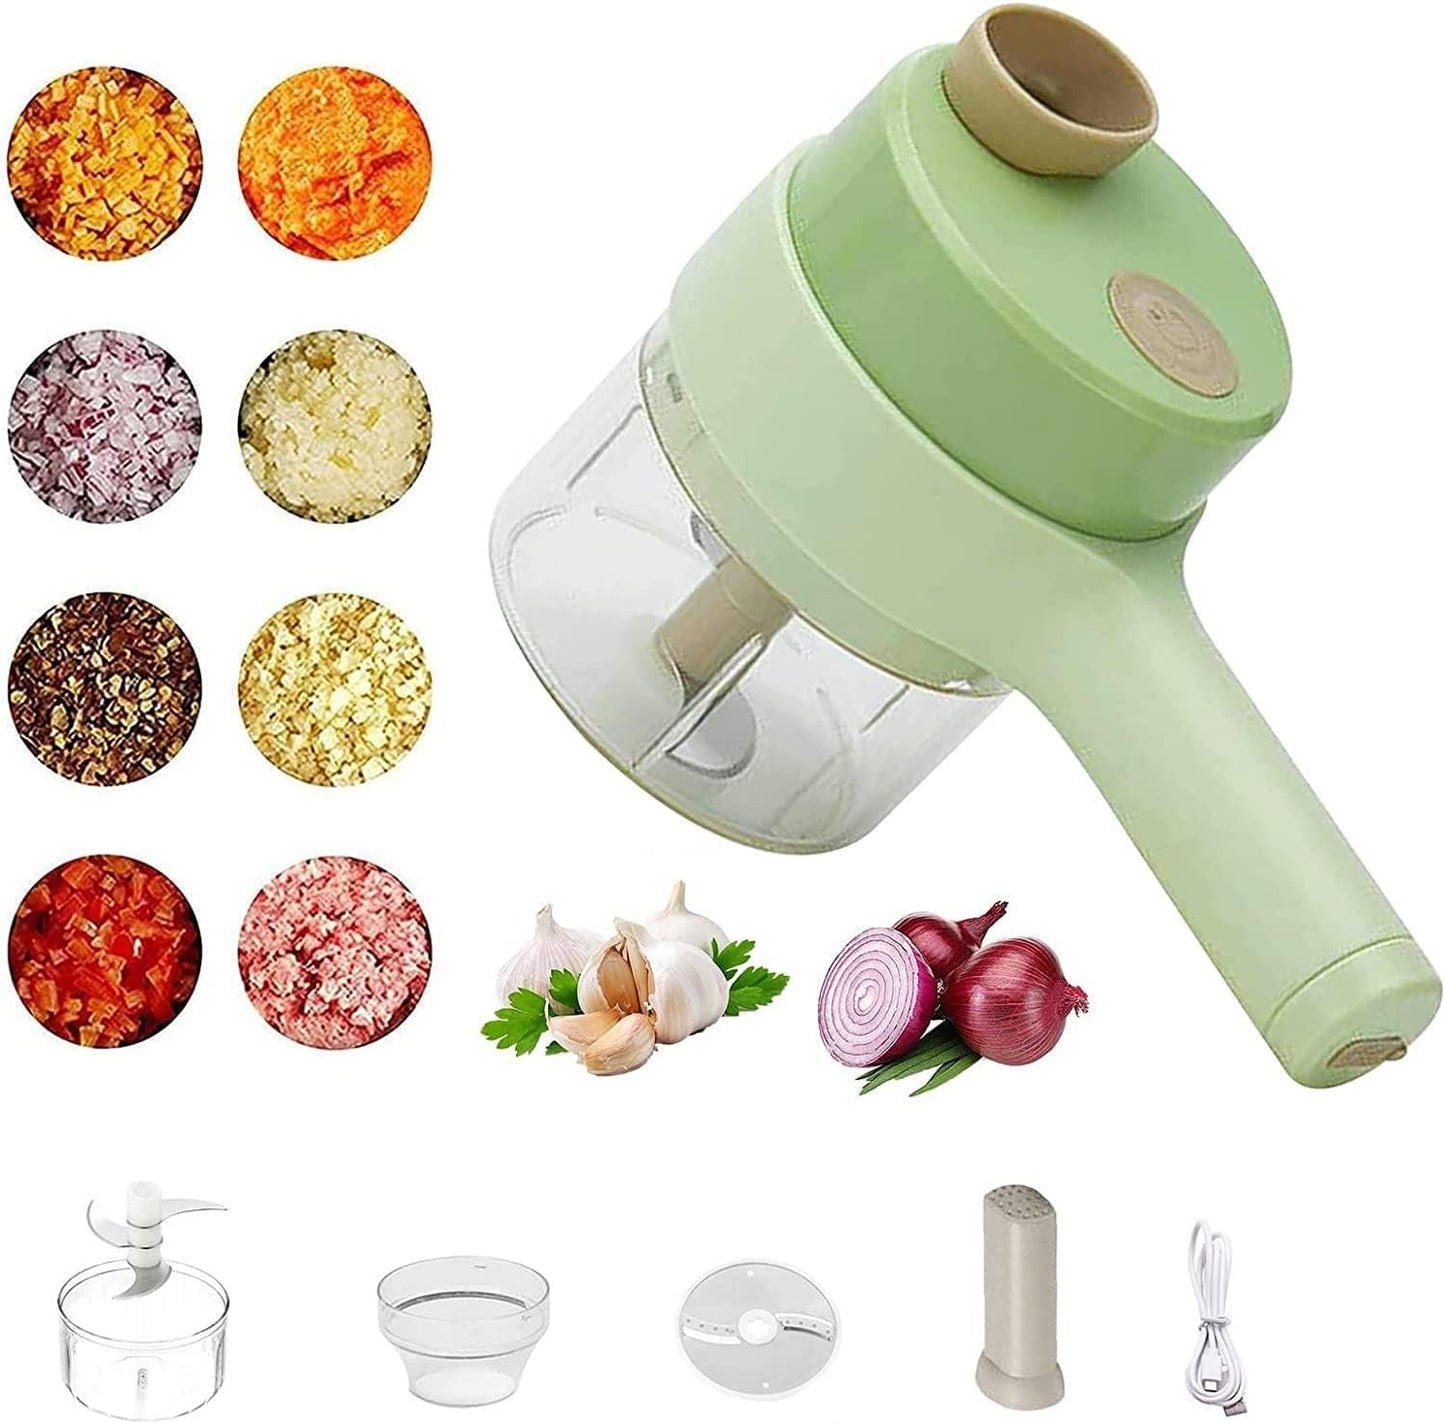 4 In 1 Electric Handheld Vegetable Cutter